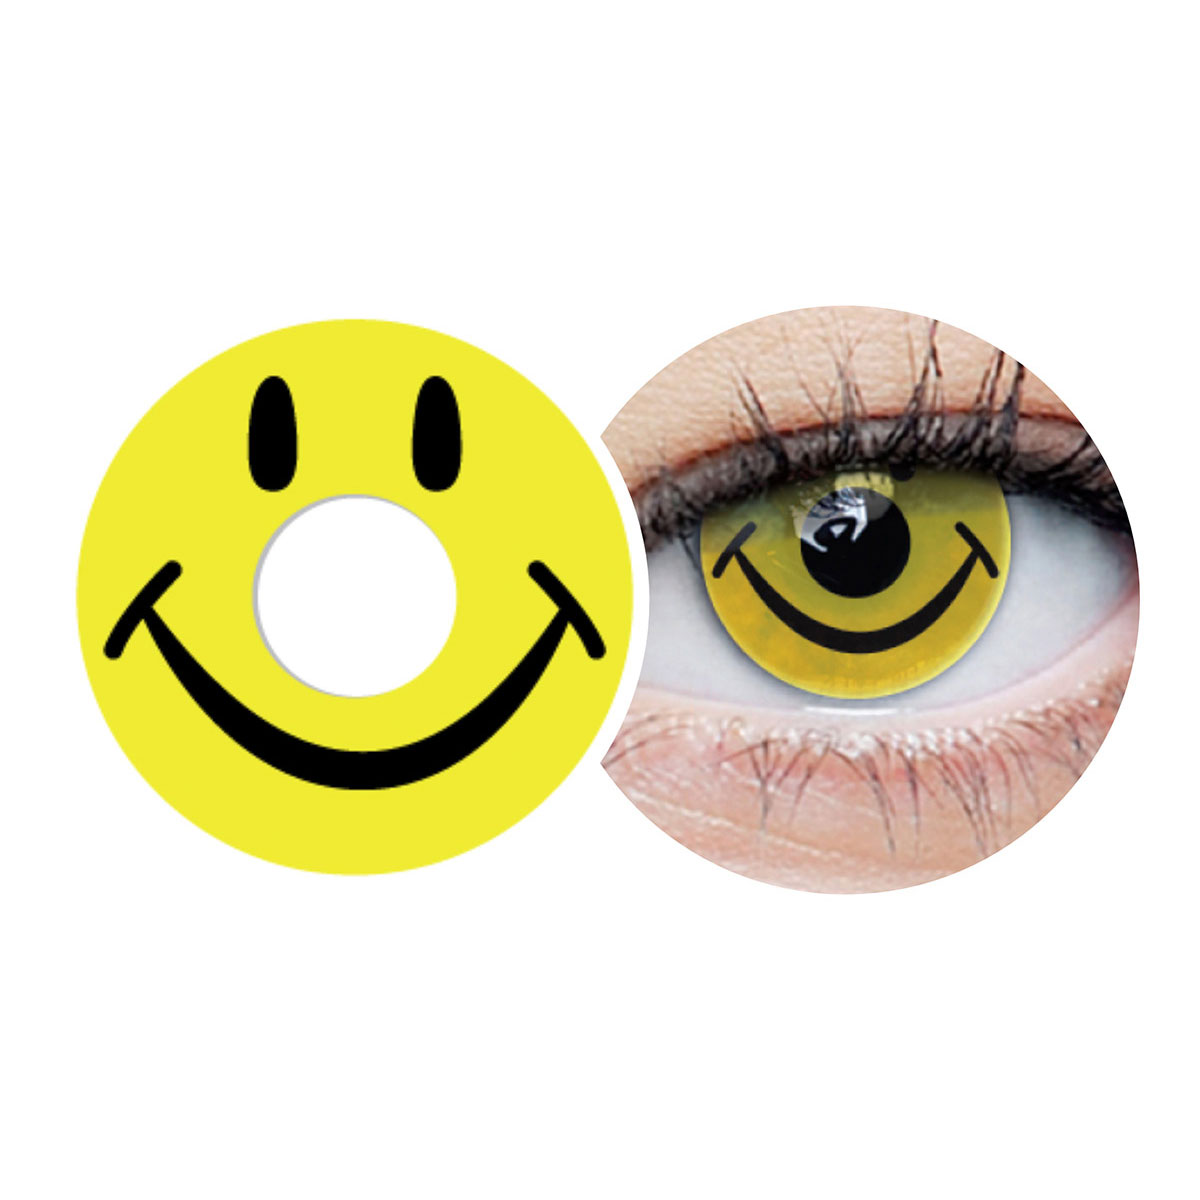 Smiley?-?Clearcolor?Phantom? (2 lenses), Clearlab, Fantasy / Halloween Coloured Monthly Disposables, Polymacon